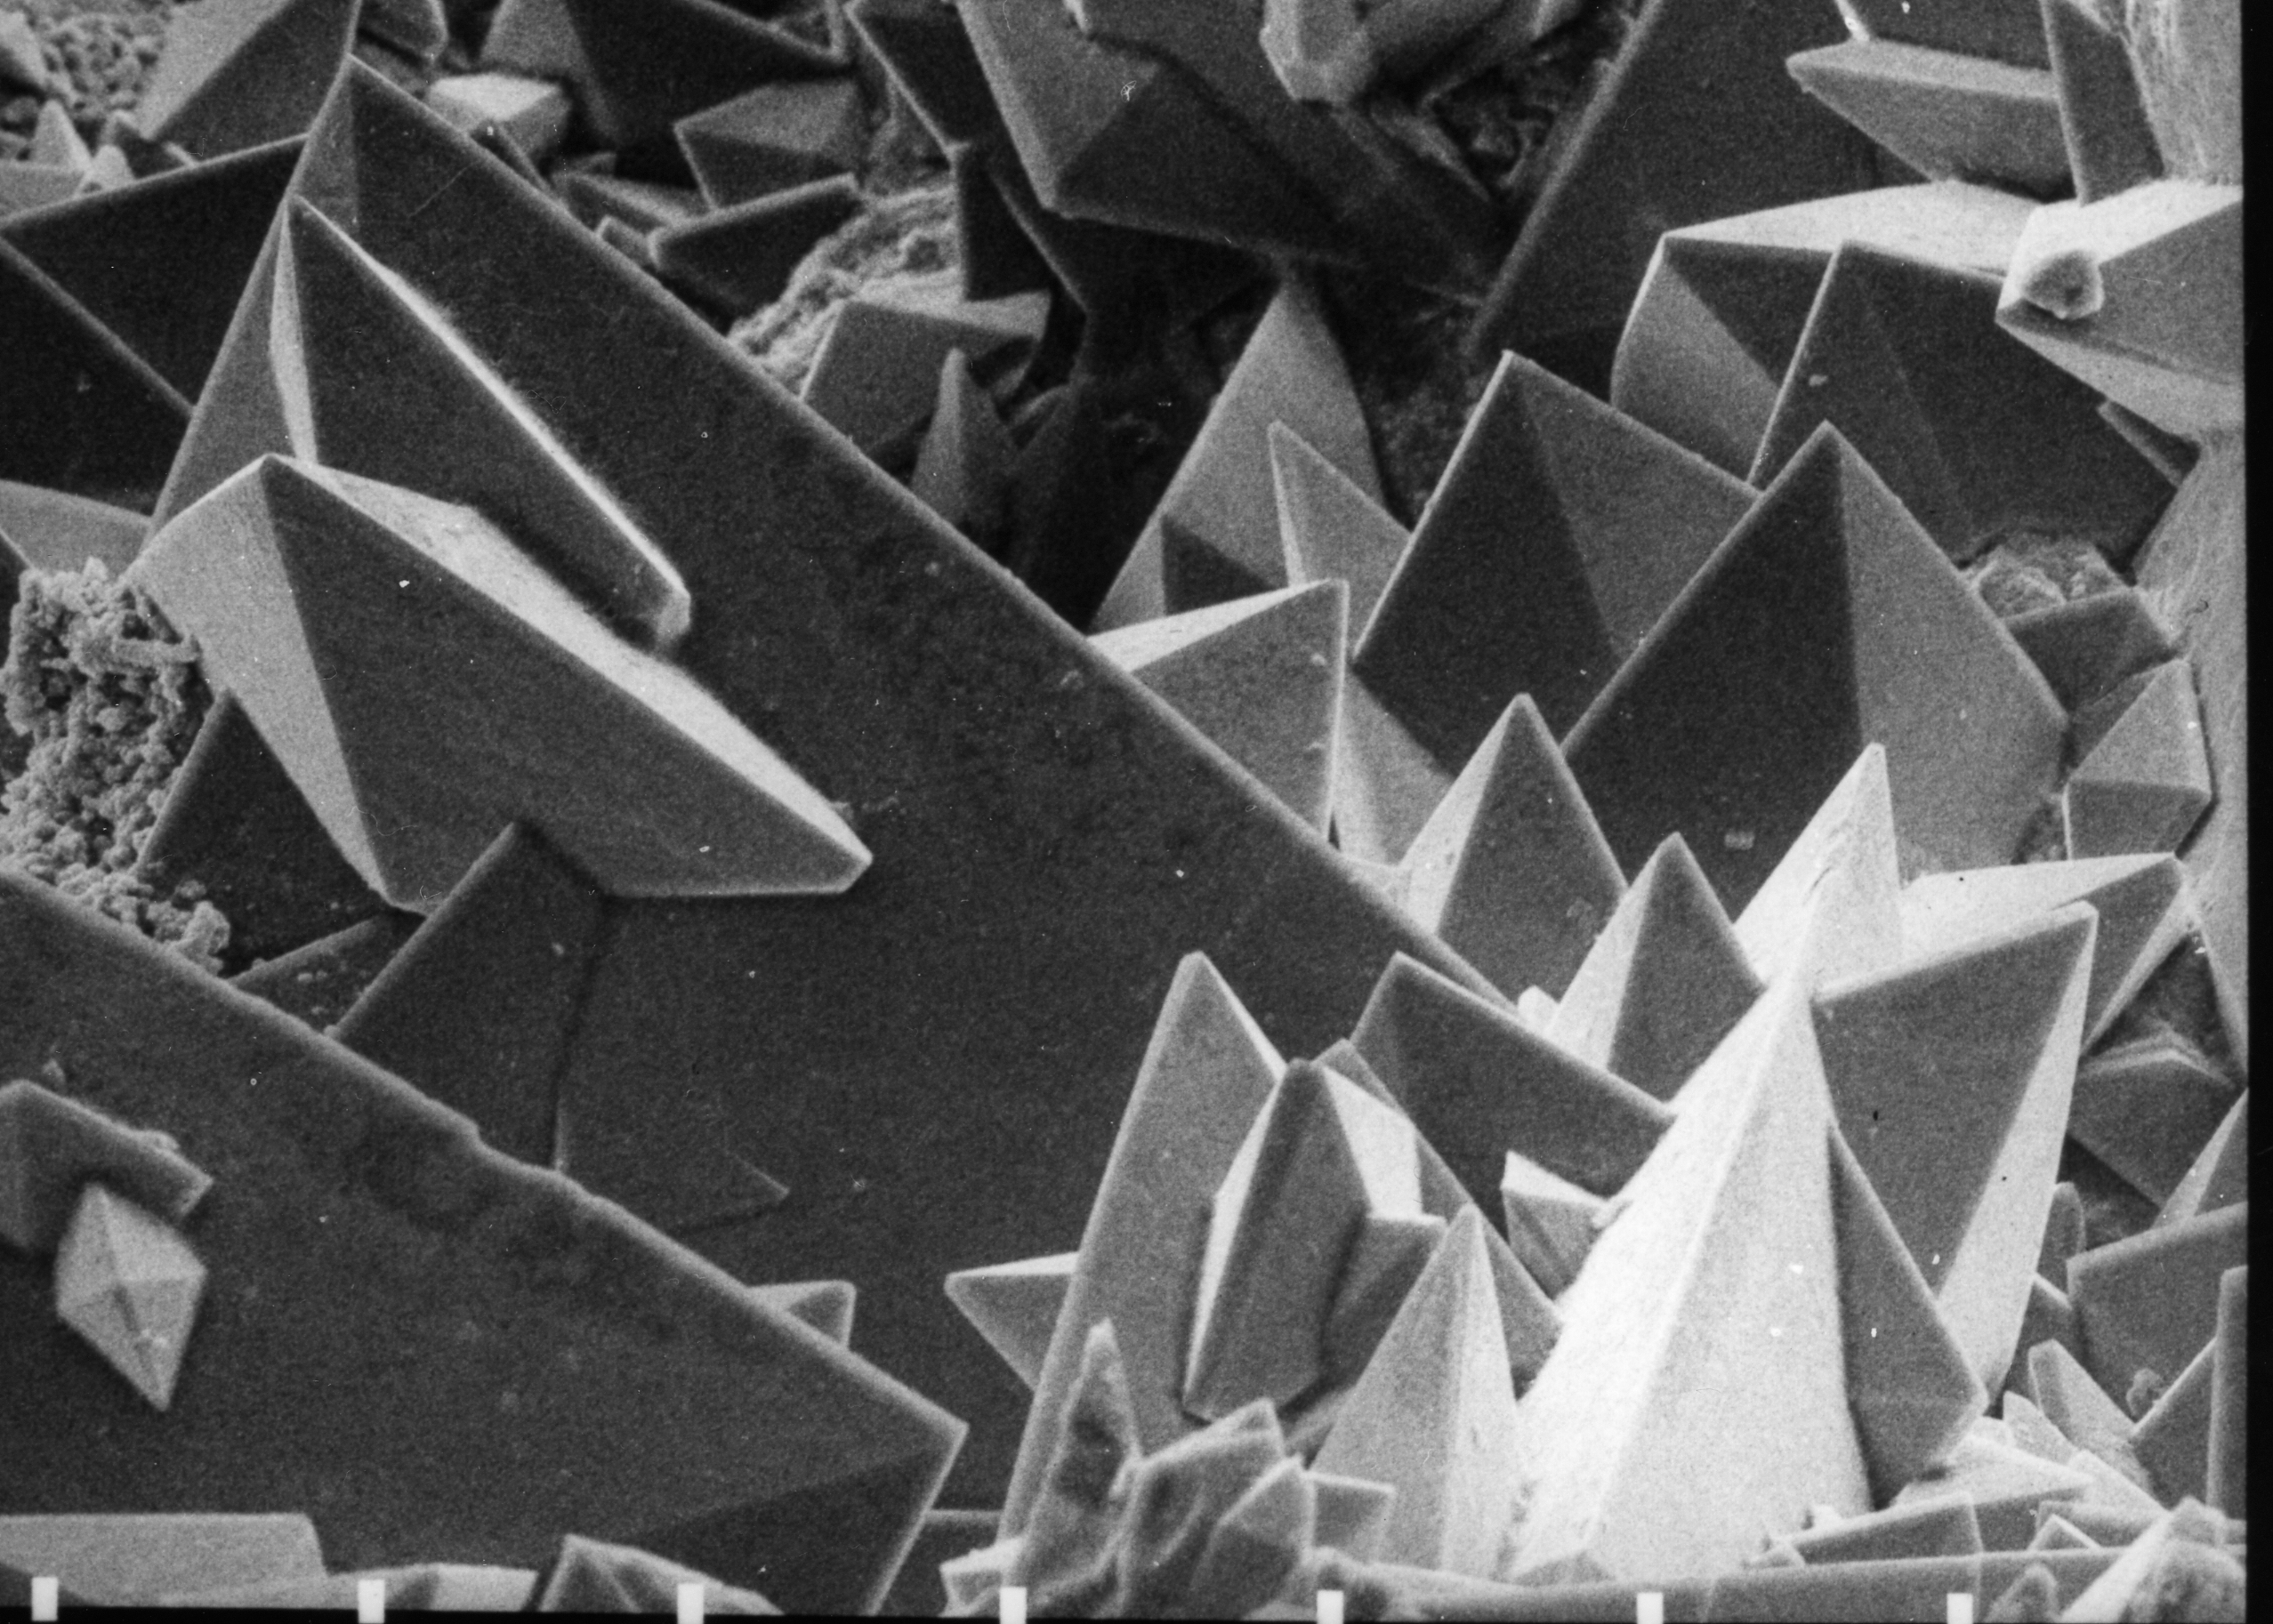 Calcium oxalate dihydrate crystals under Scanning Electron Micrograph (SEM) taken at 30 KV. Source: Wikimedia commons[10]